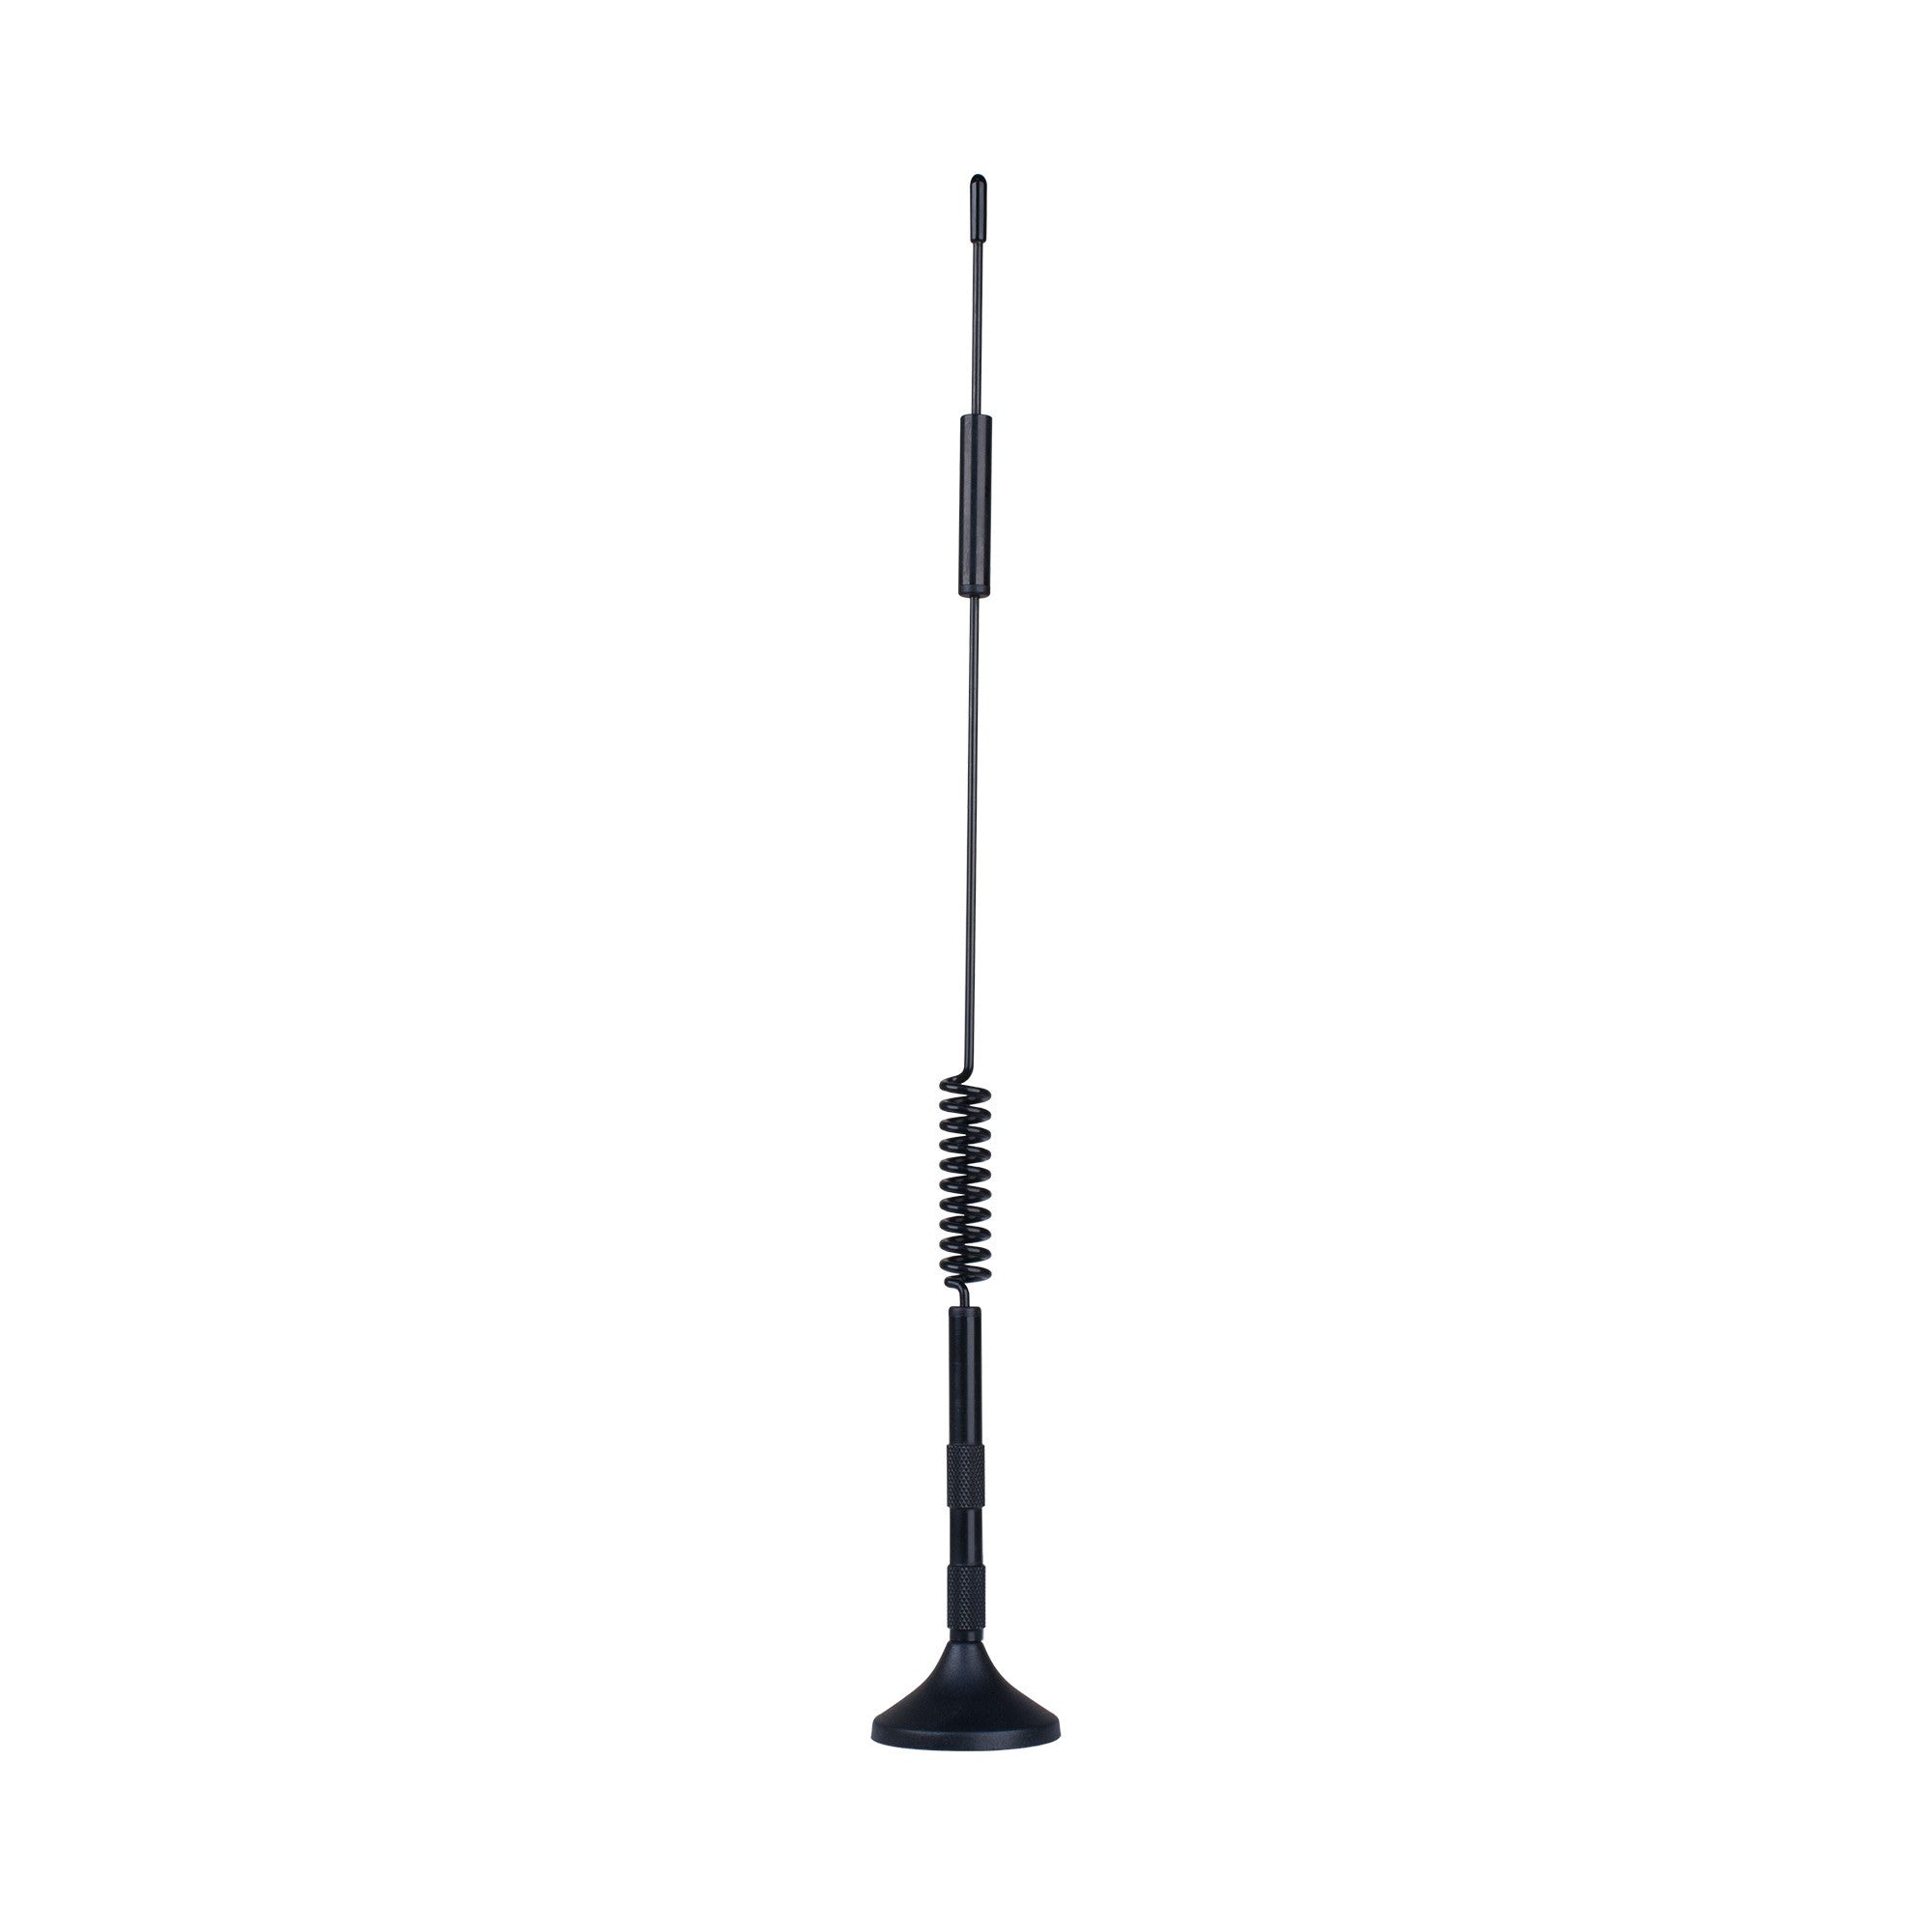 weBoost Magnet Mount Vehicle Antenna 12 in. w/ 10 ft. RG-174 Cable TNC